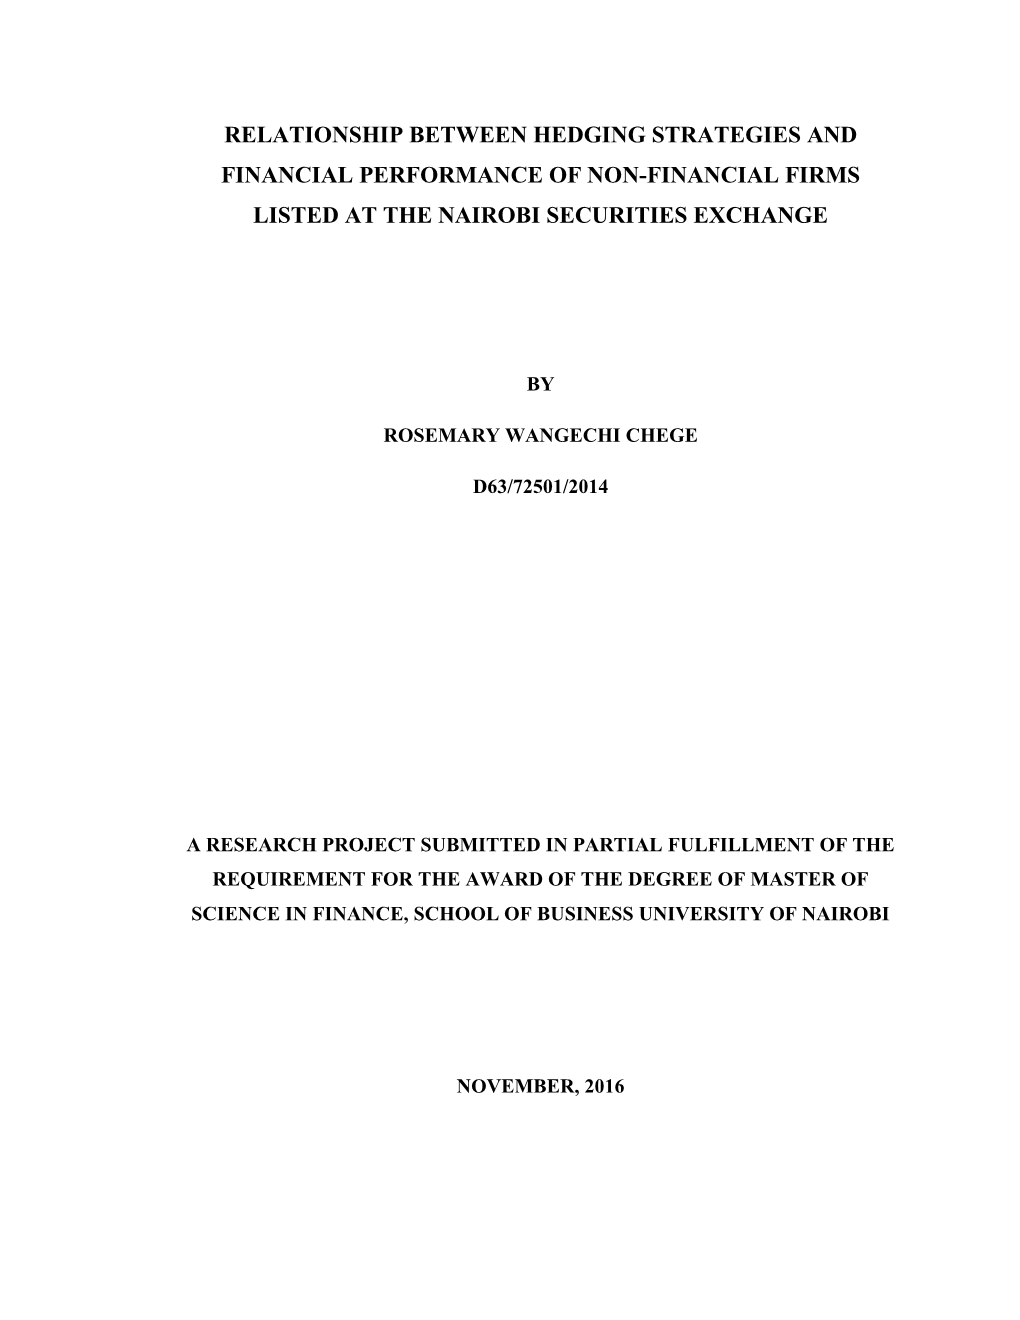 Relationship Between Hedging Strategies and Financial Performance of Non-Financial Firms Listed at the Nairobi Securities Exchange